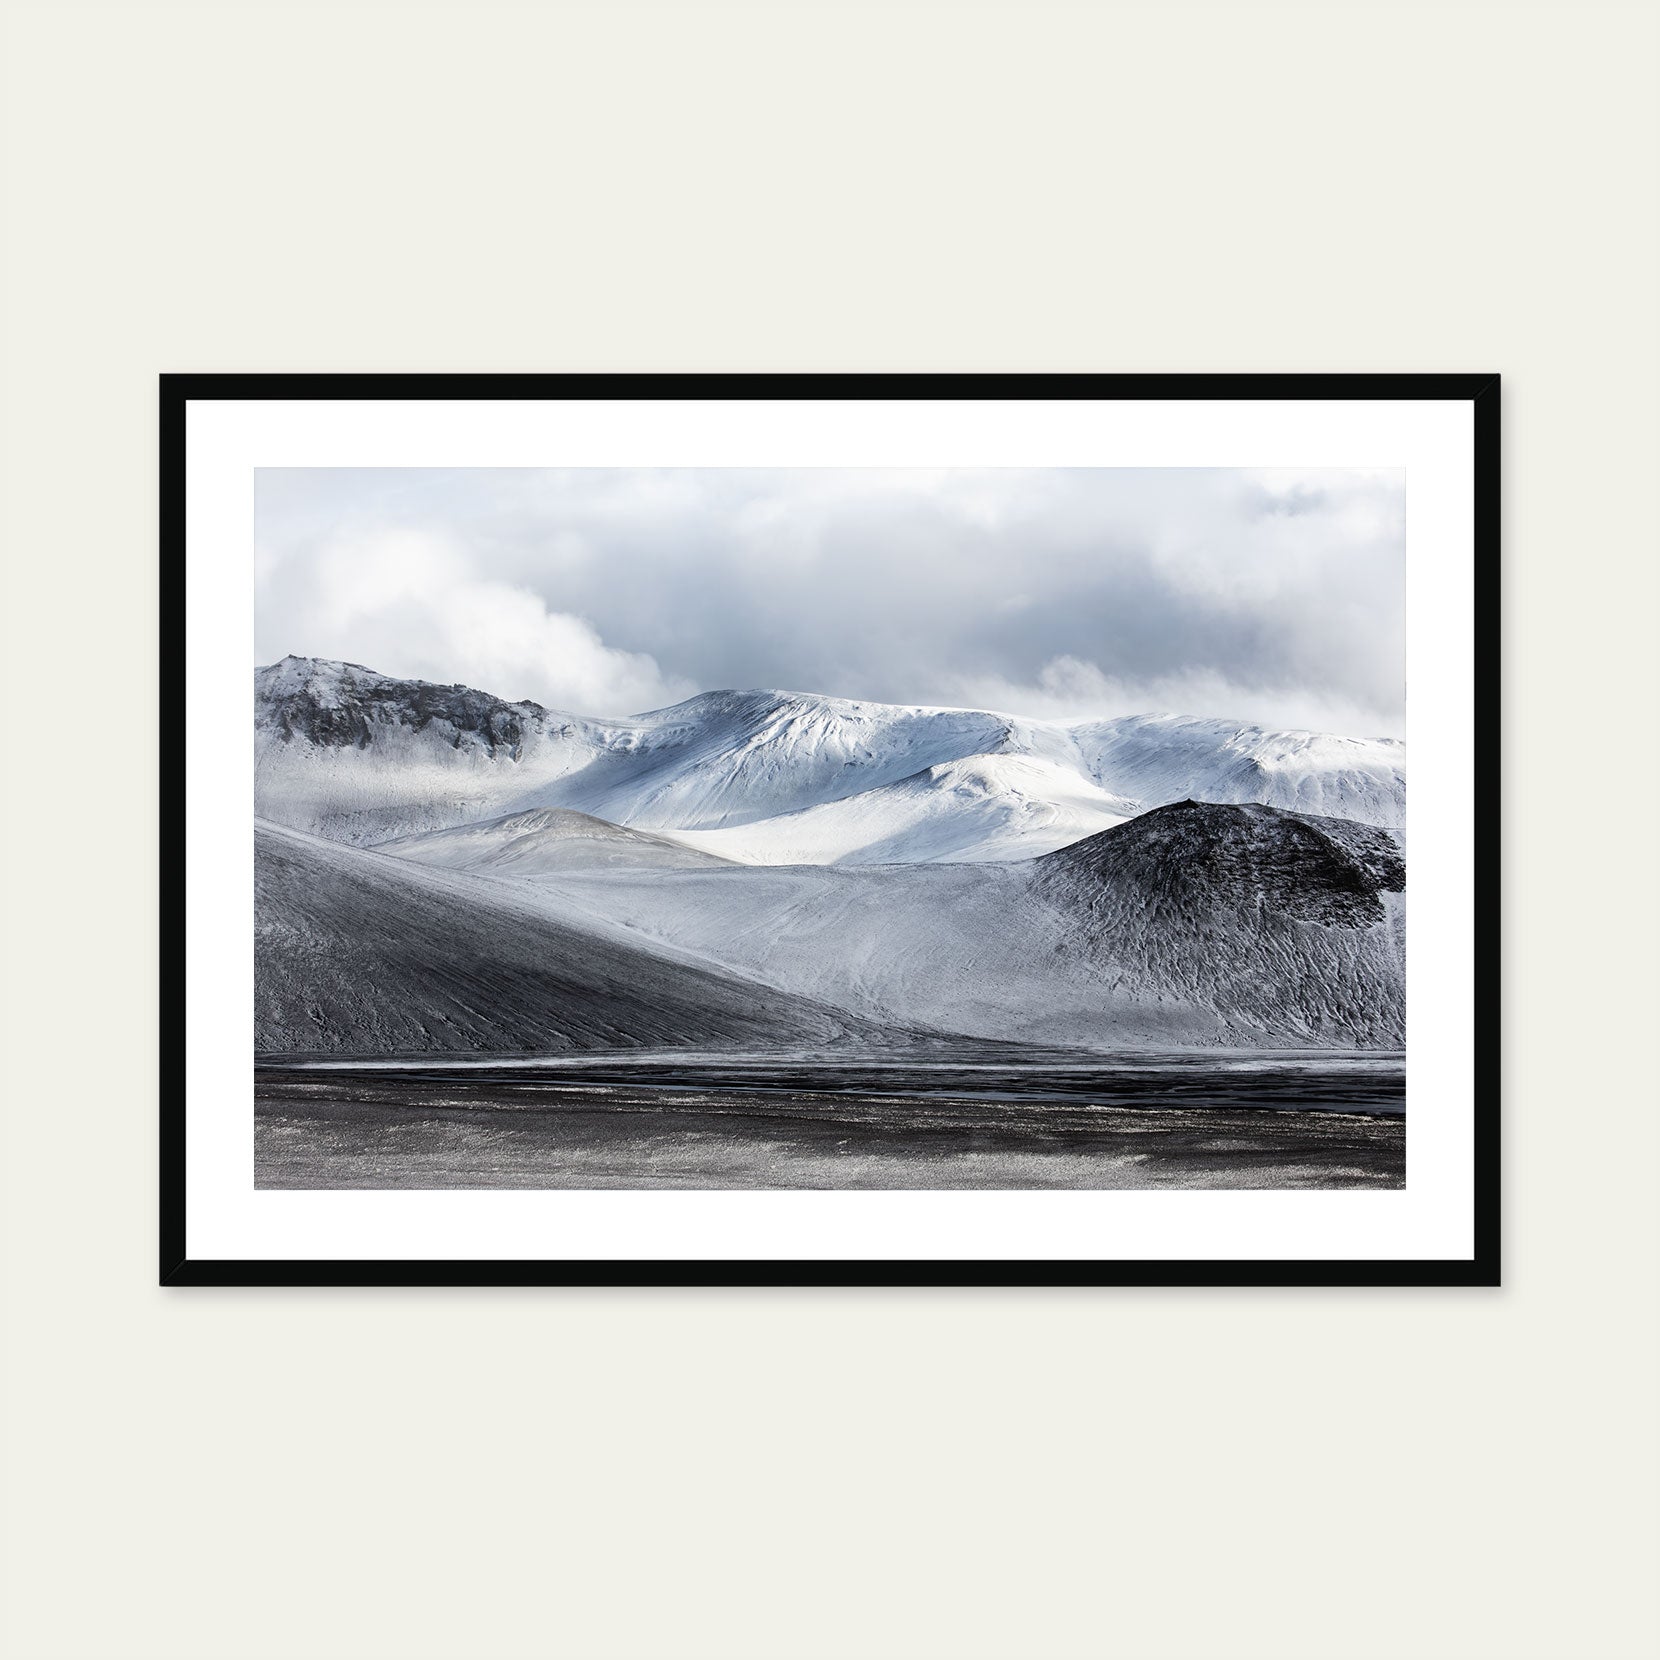 A framed print of a snowy mountain side in Iceland